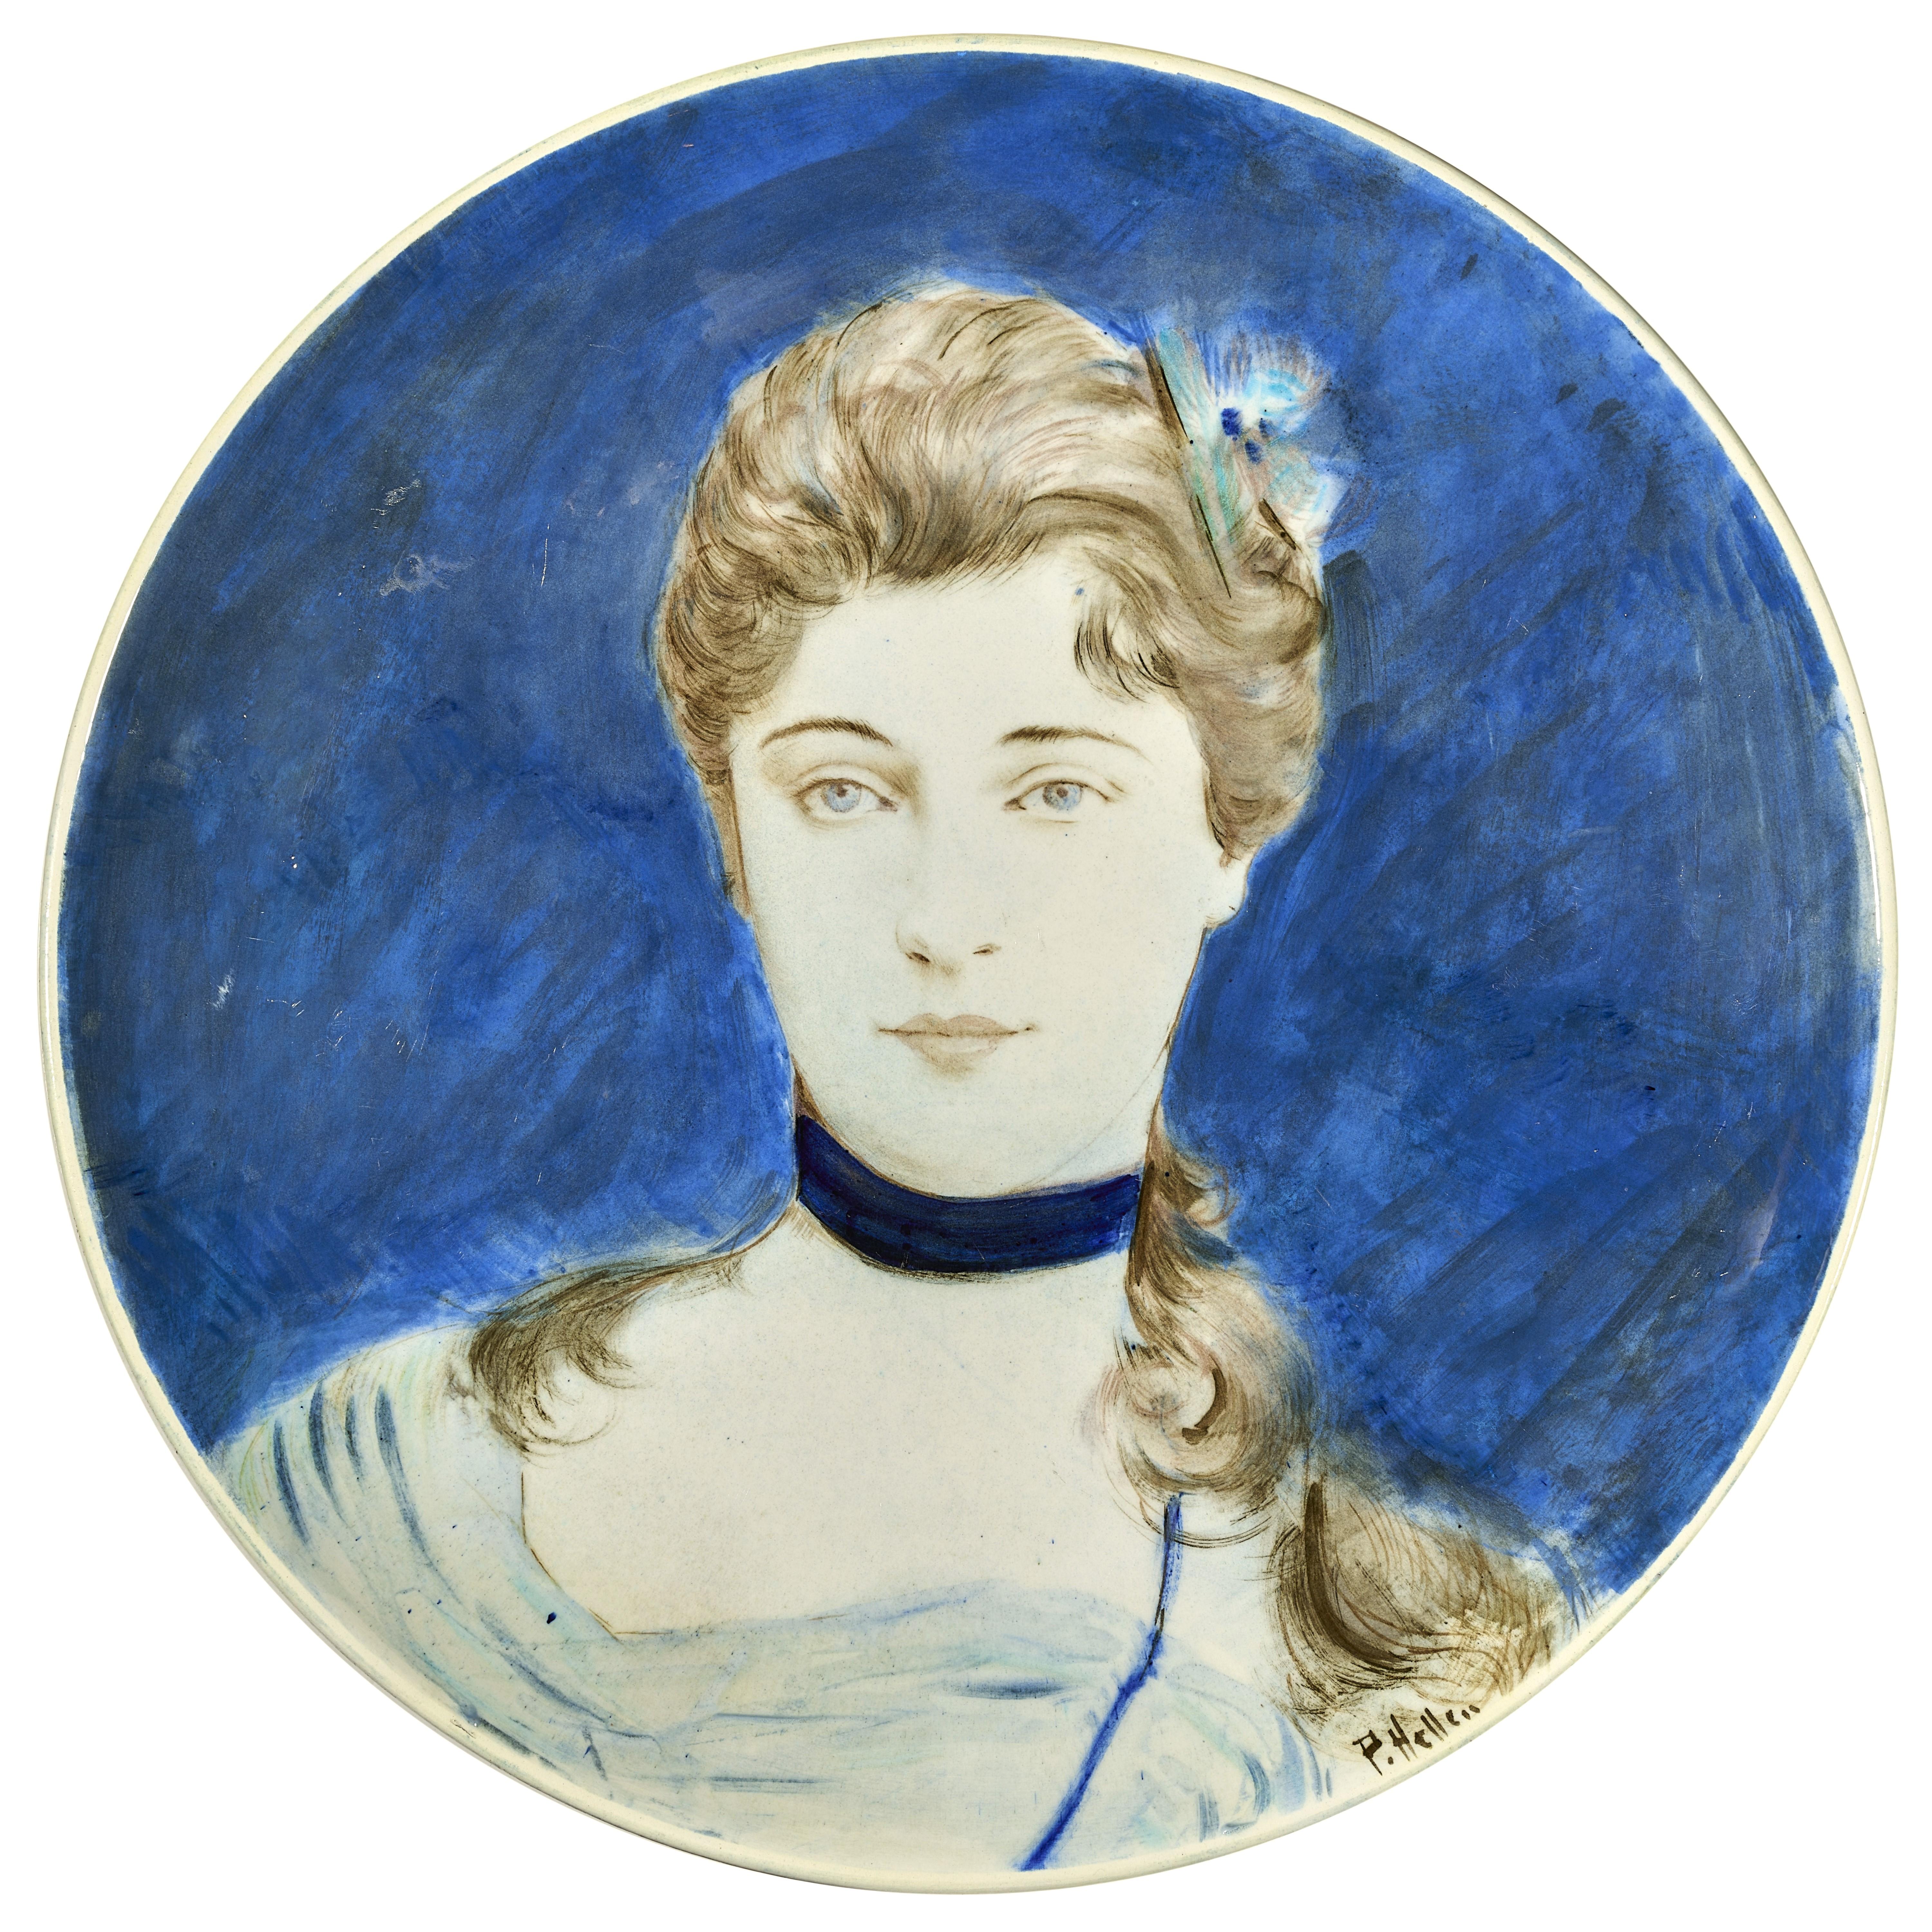 Large circular dish decorated by Paul Helleu with a portrait of his future wife  - Art by Paul César Helleu